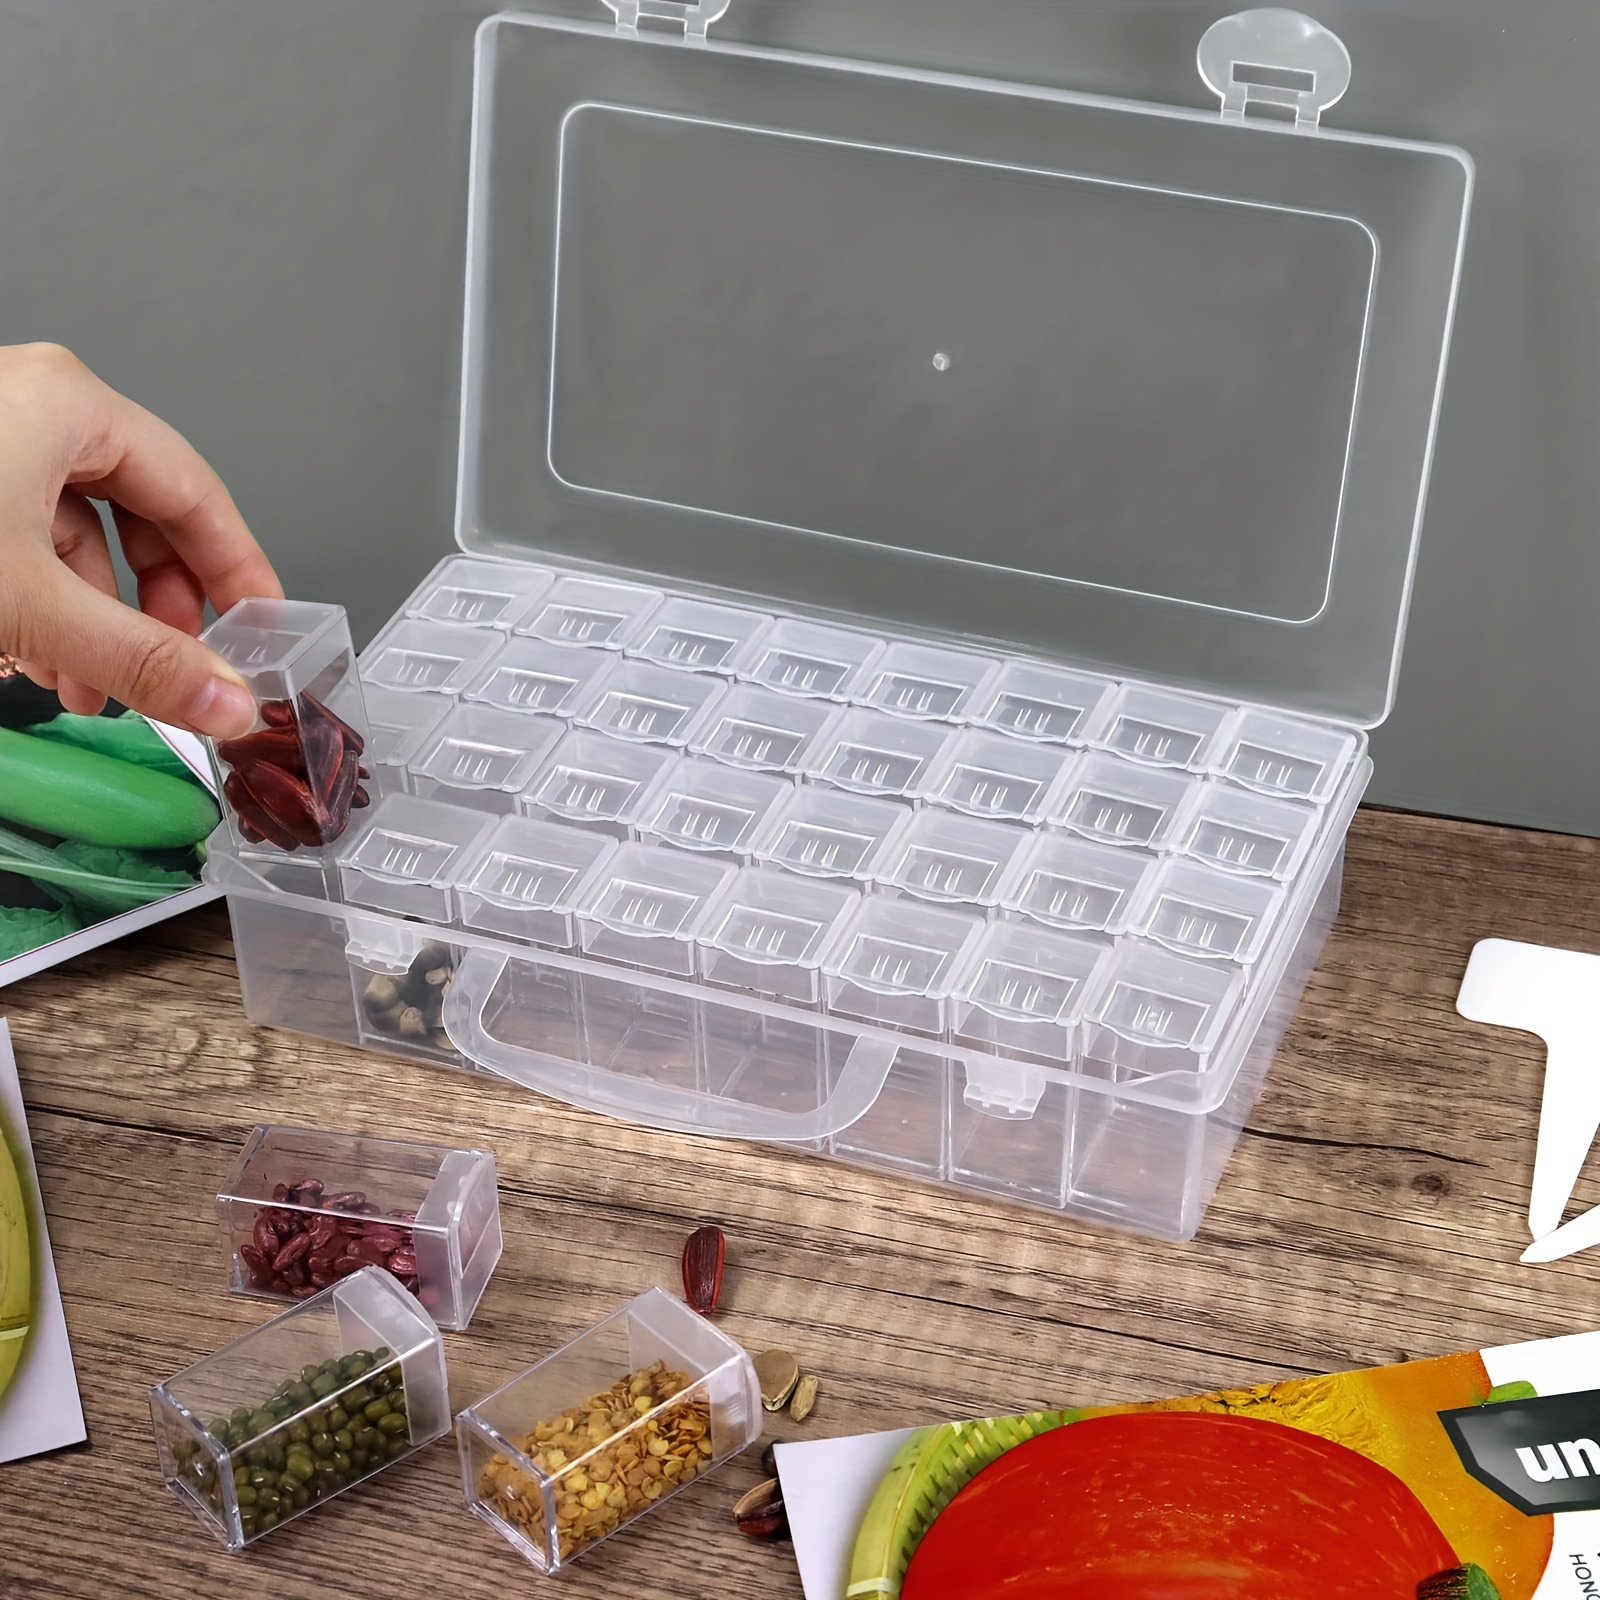 Seed storage box with magnetic flap for your portion bags sprouting seeds